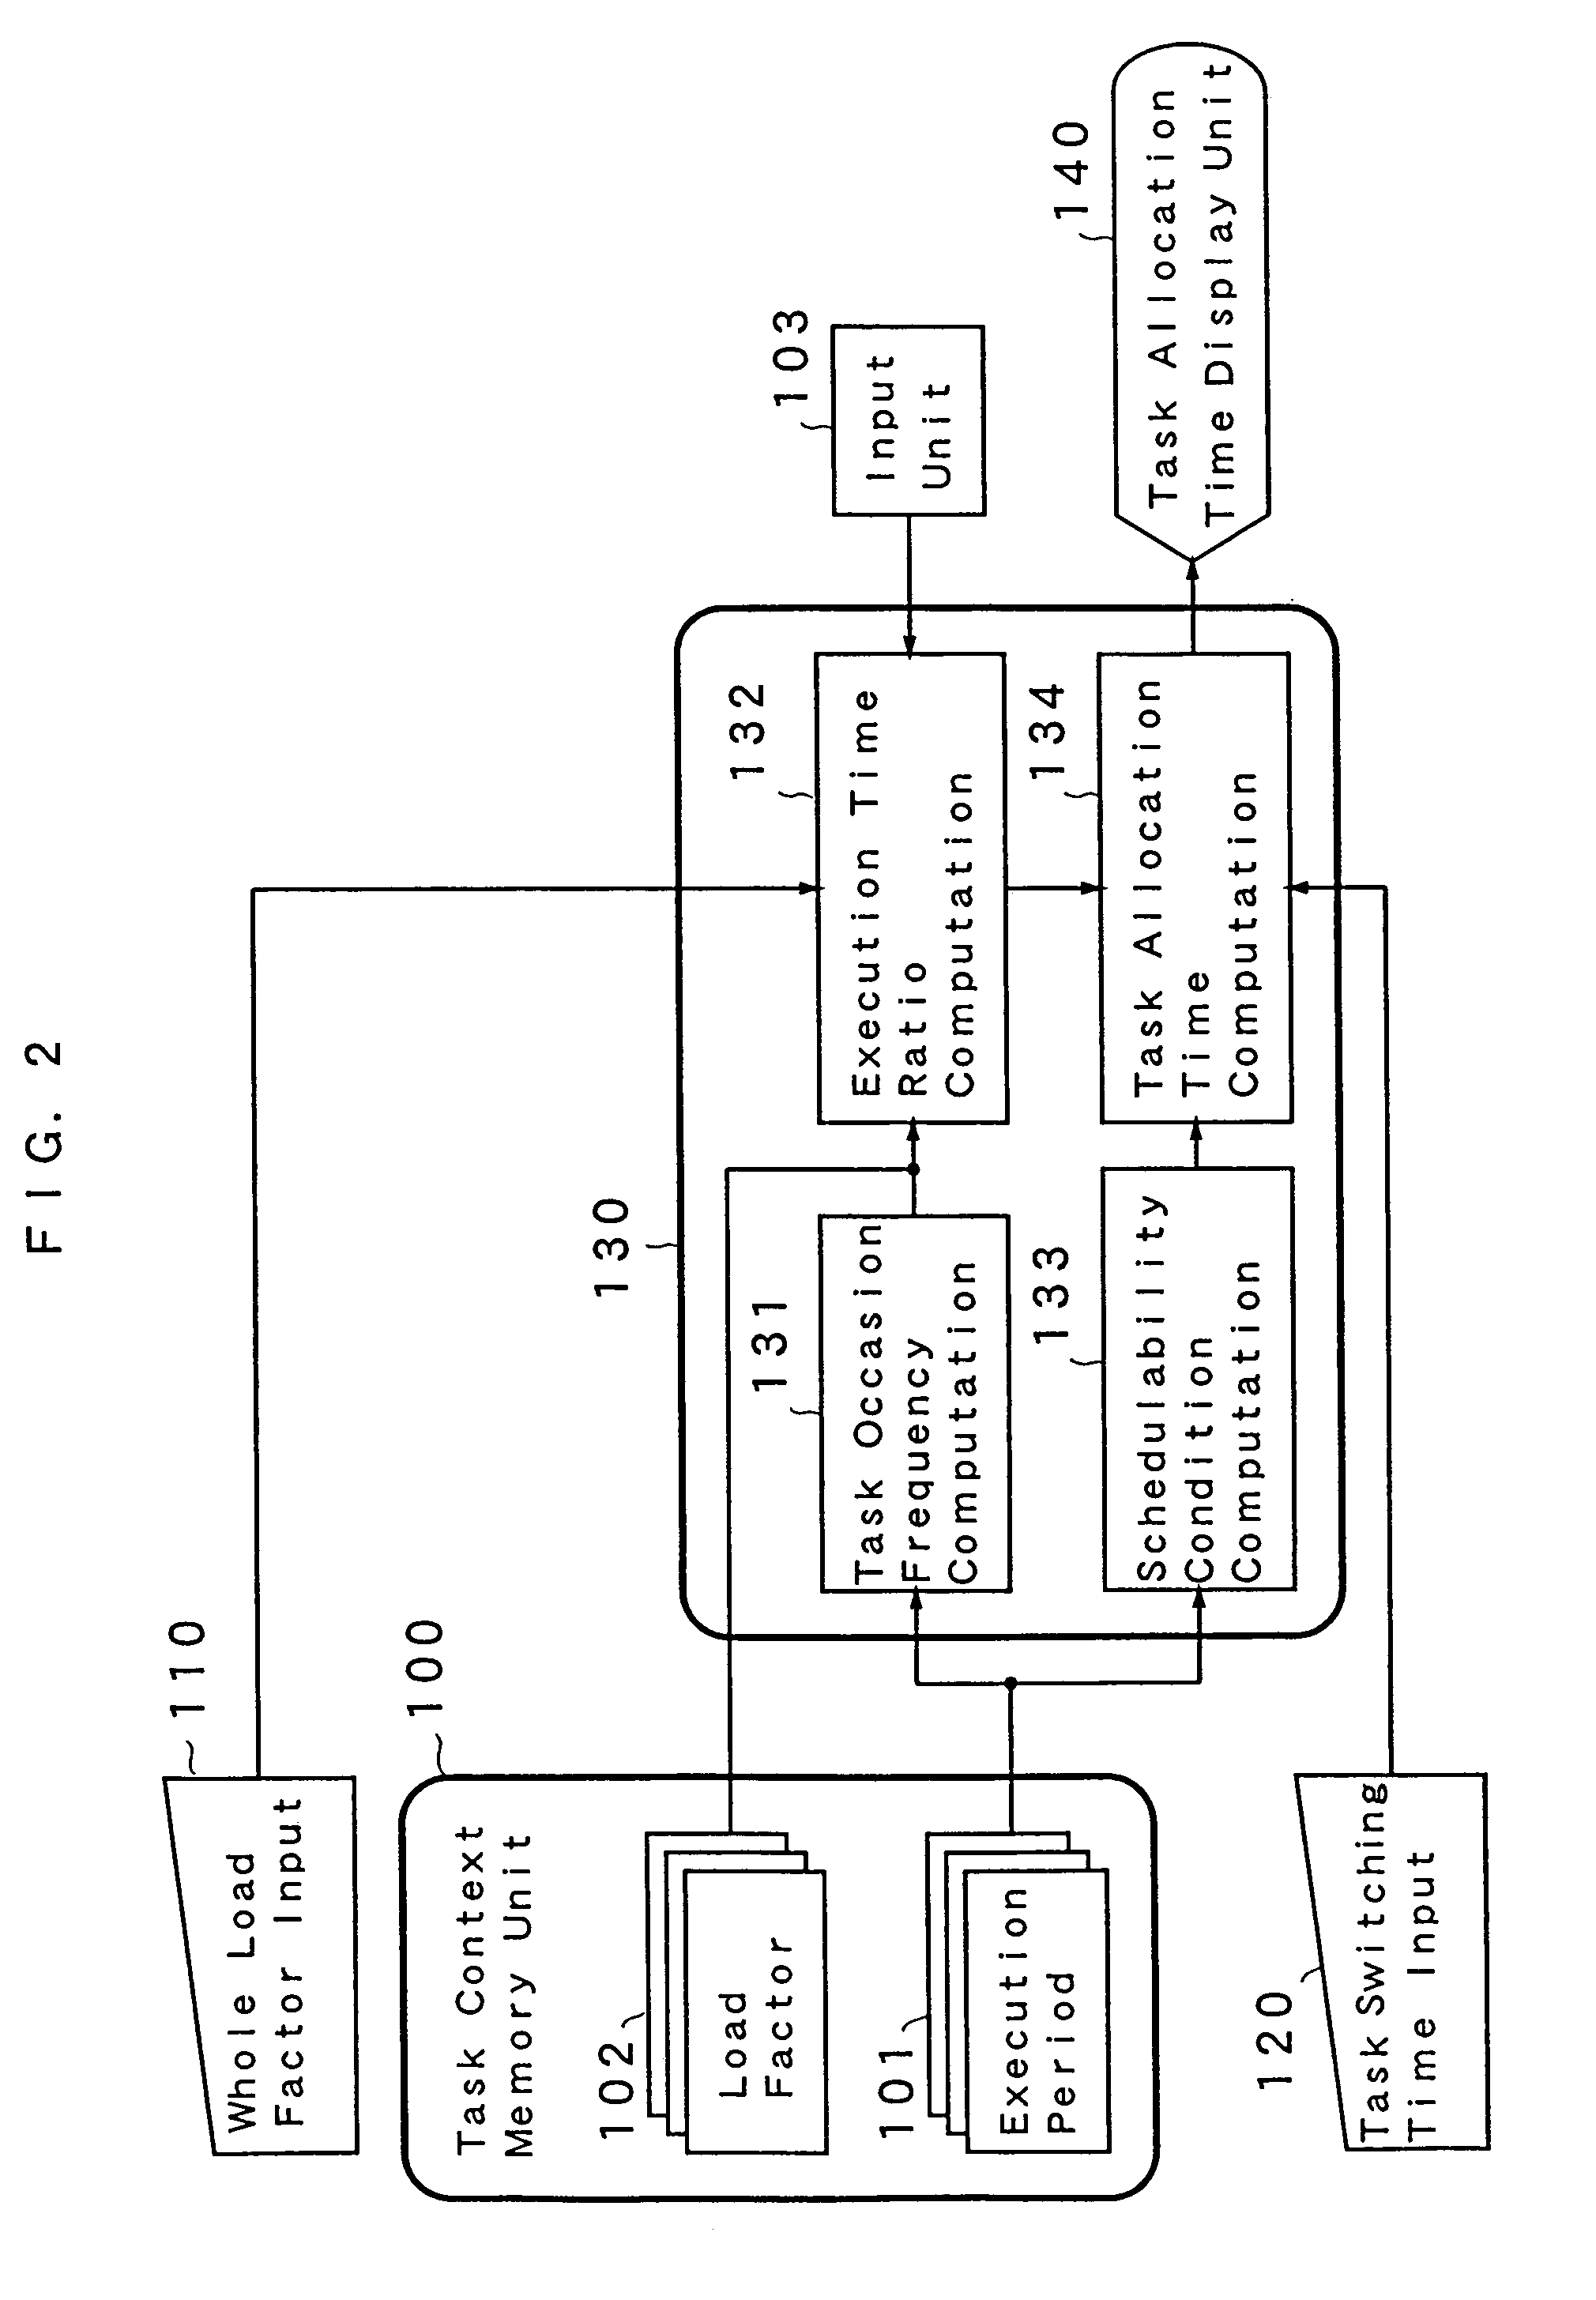 Task allocation time decision apparatus and method of deciding task allocation time